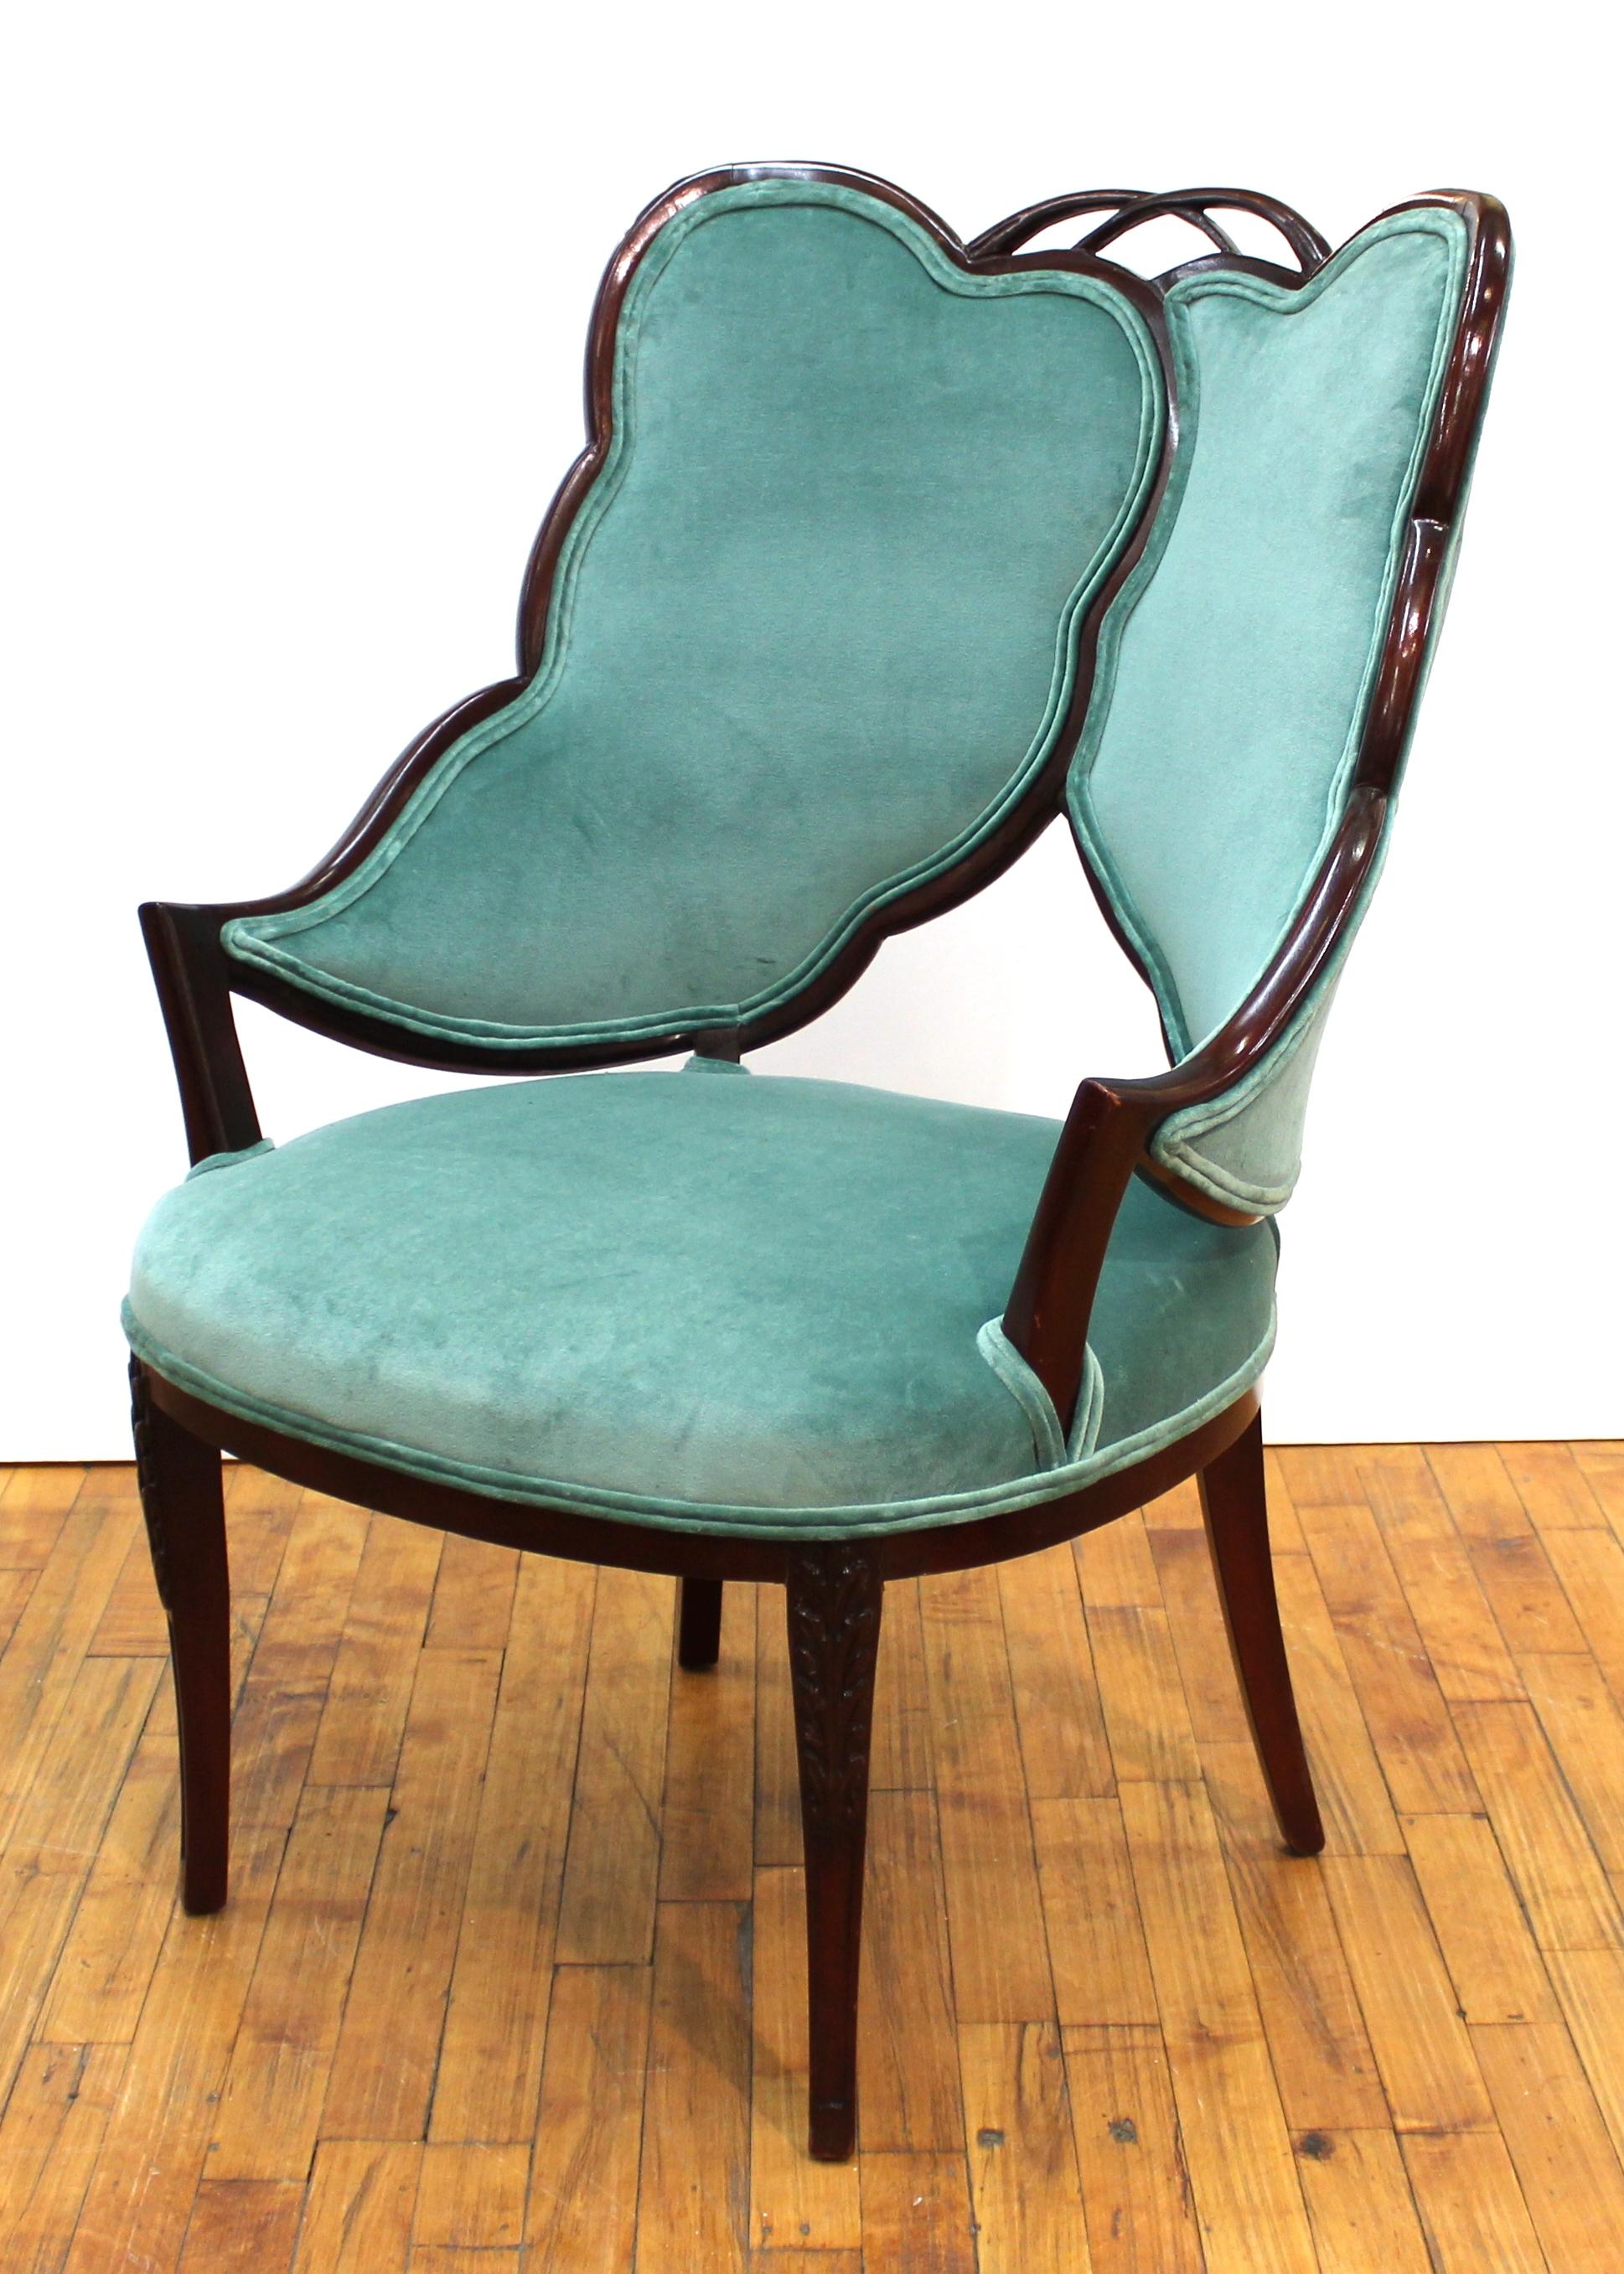 Mid-20th Century French Art Deco Mahogany Chairs in Jade Green Velvet with Leaf Design